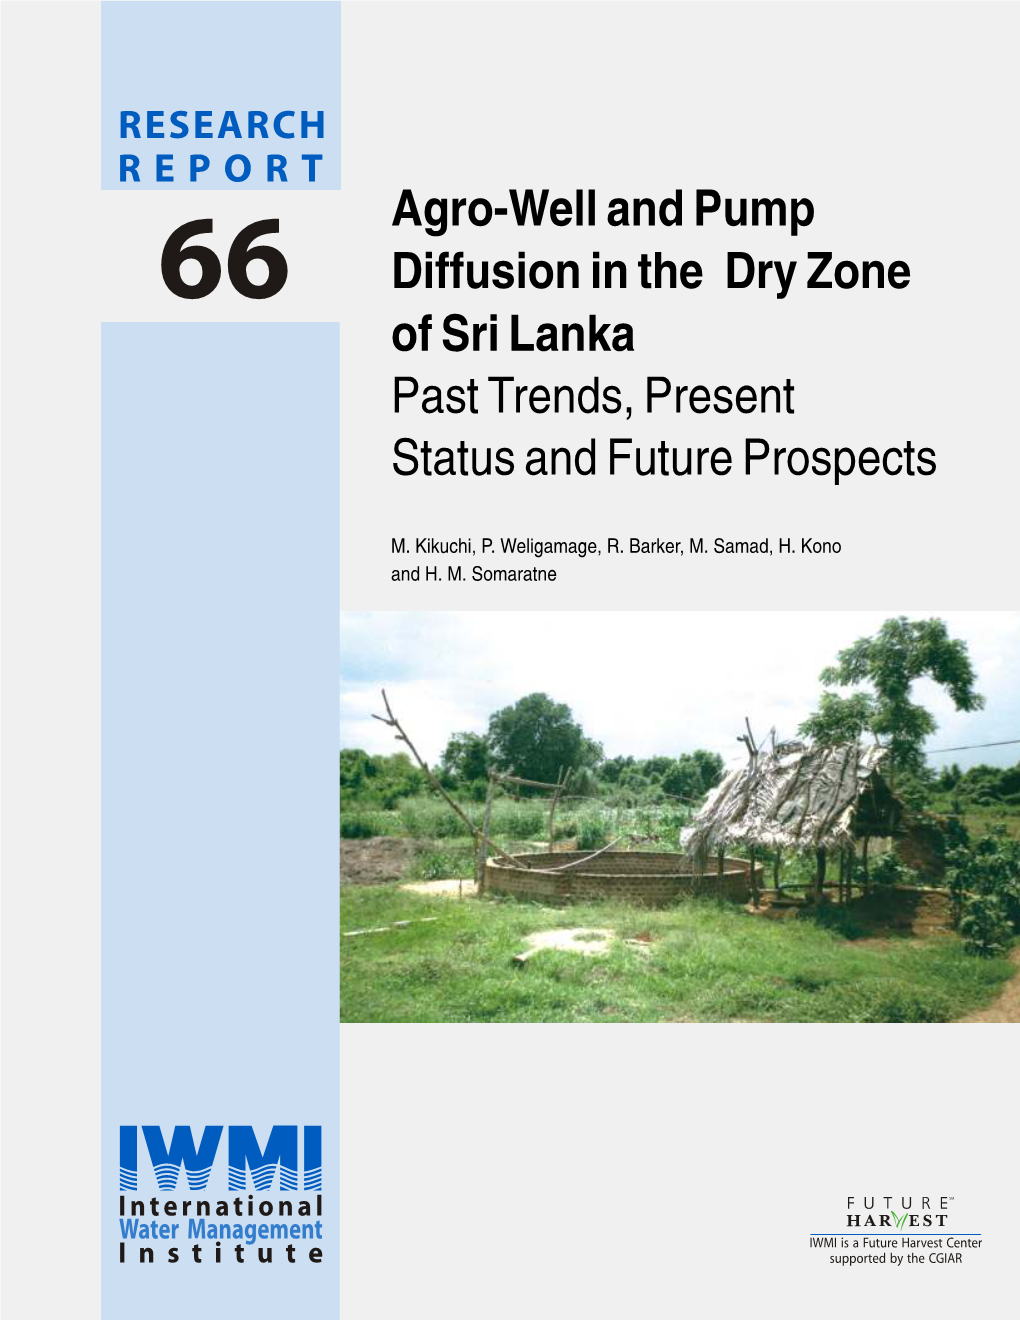 Agro-Well and Pump Diffusion in the Dry Zone of Sri Lanka Past Trends